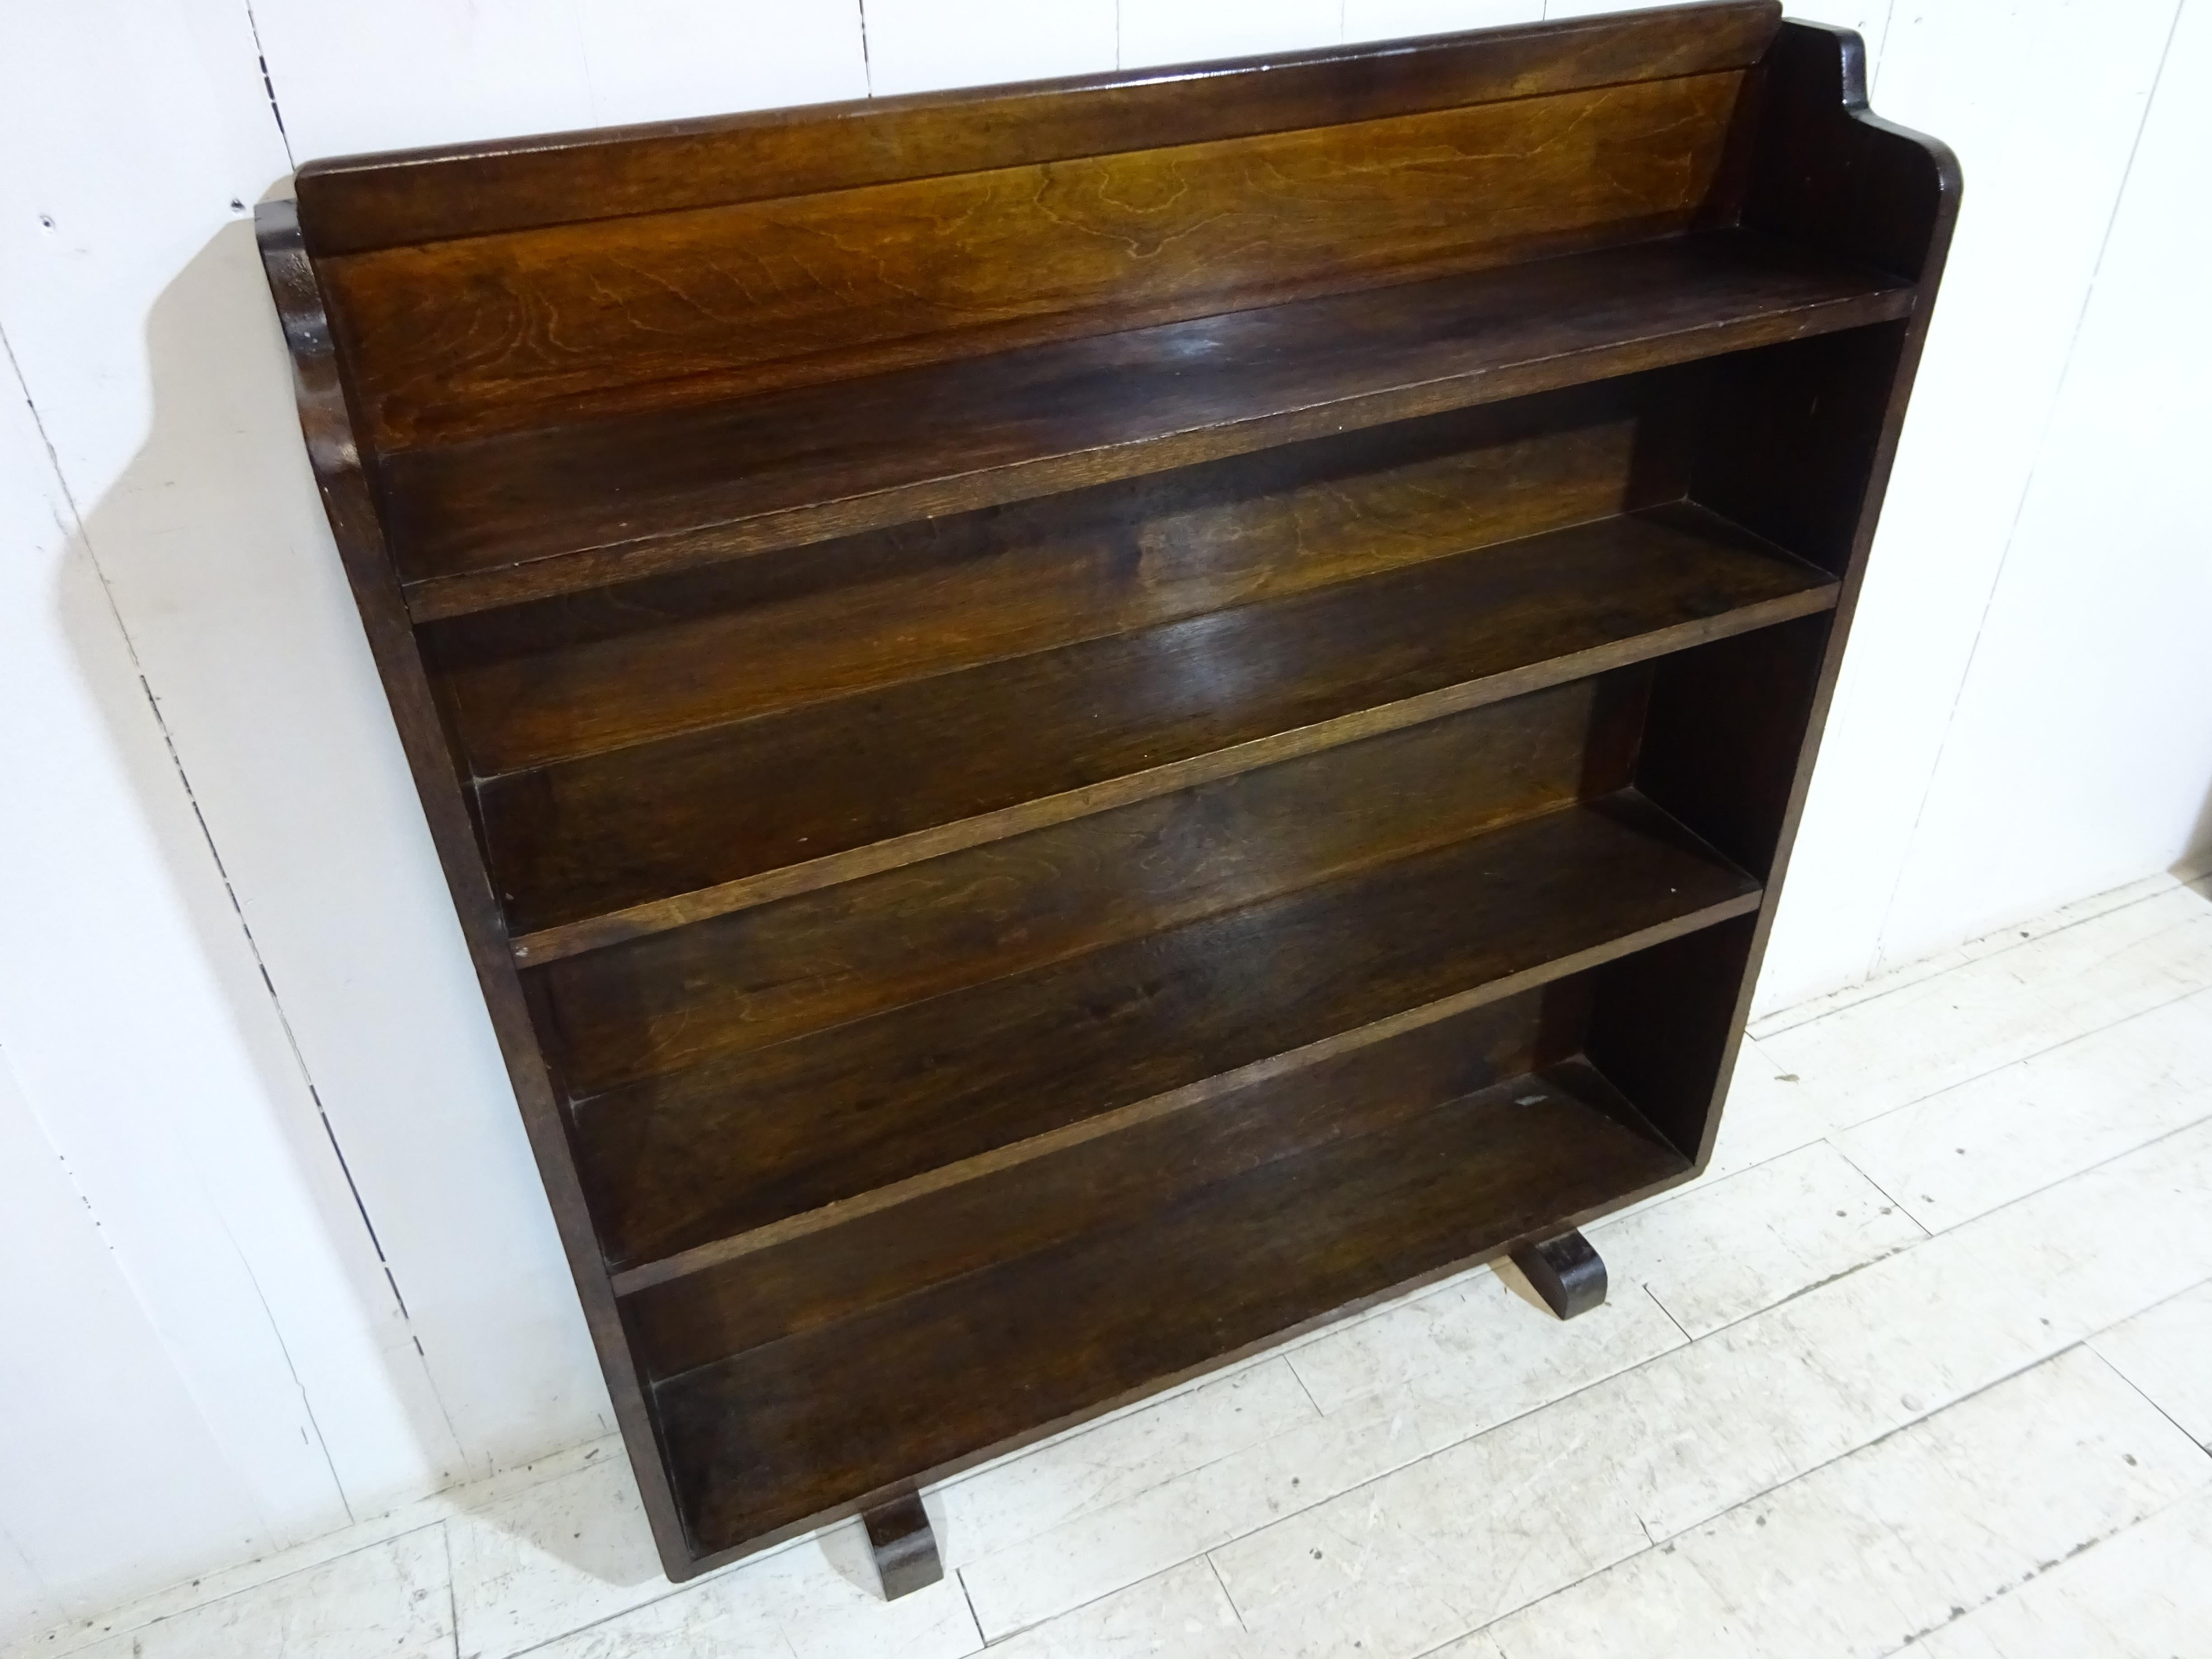 A lovely simple piece originally used for storing books and paperwork in a church office. Finished in solid oak the piece has a slightly distressed look and an aged patina. The design is typically art deco with a shaped and curved top and classic